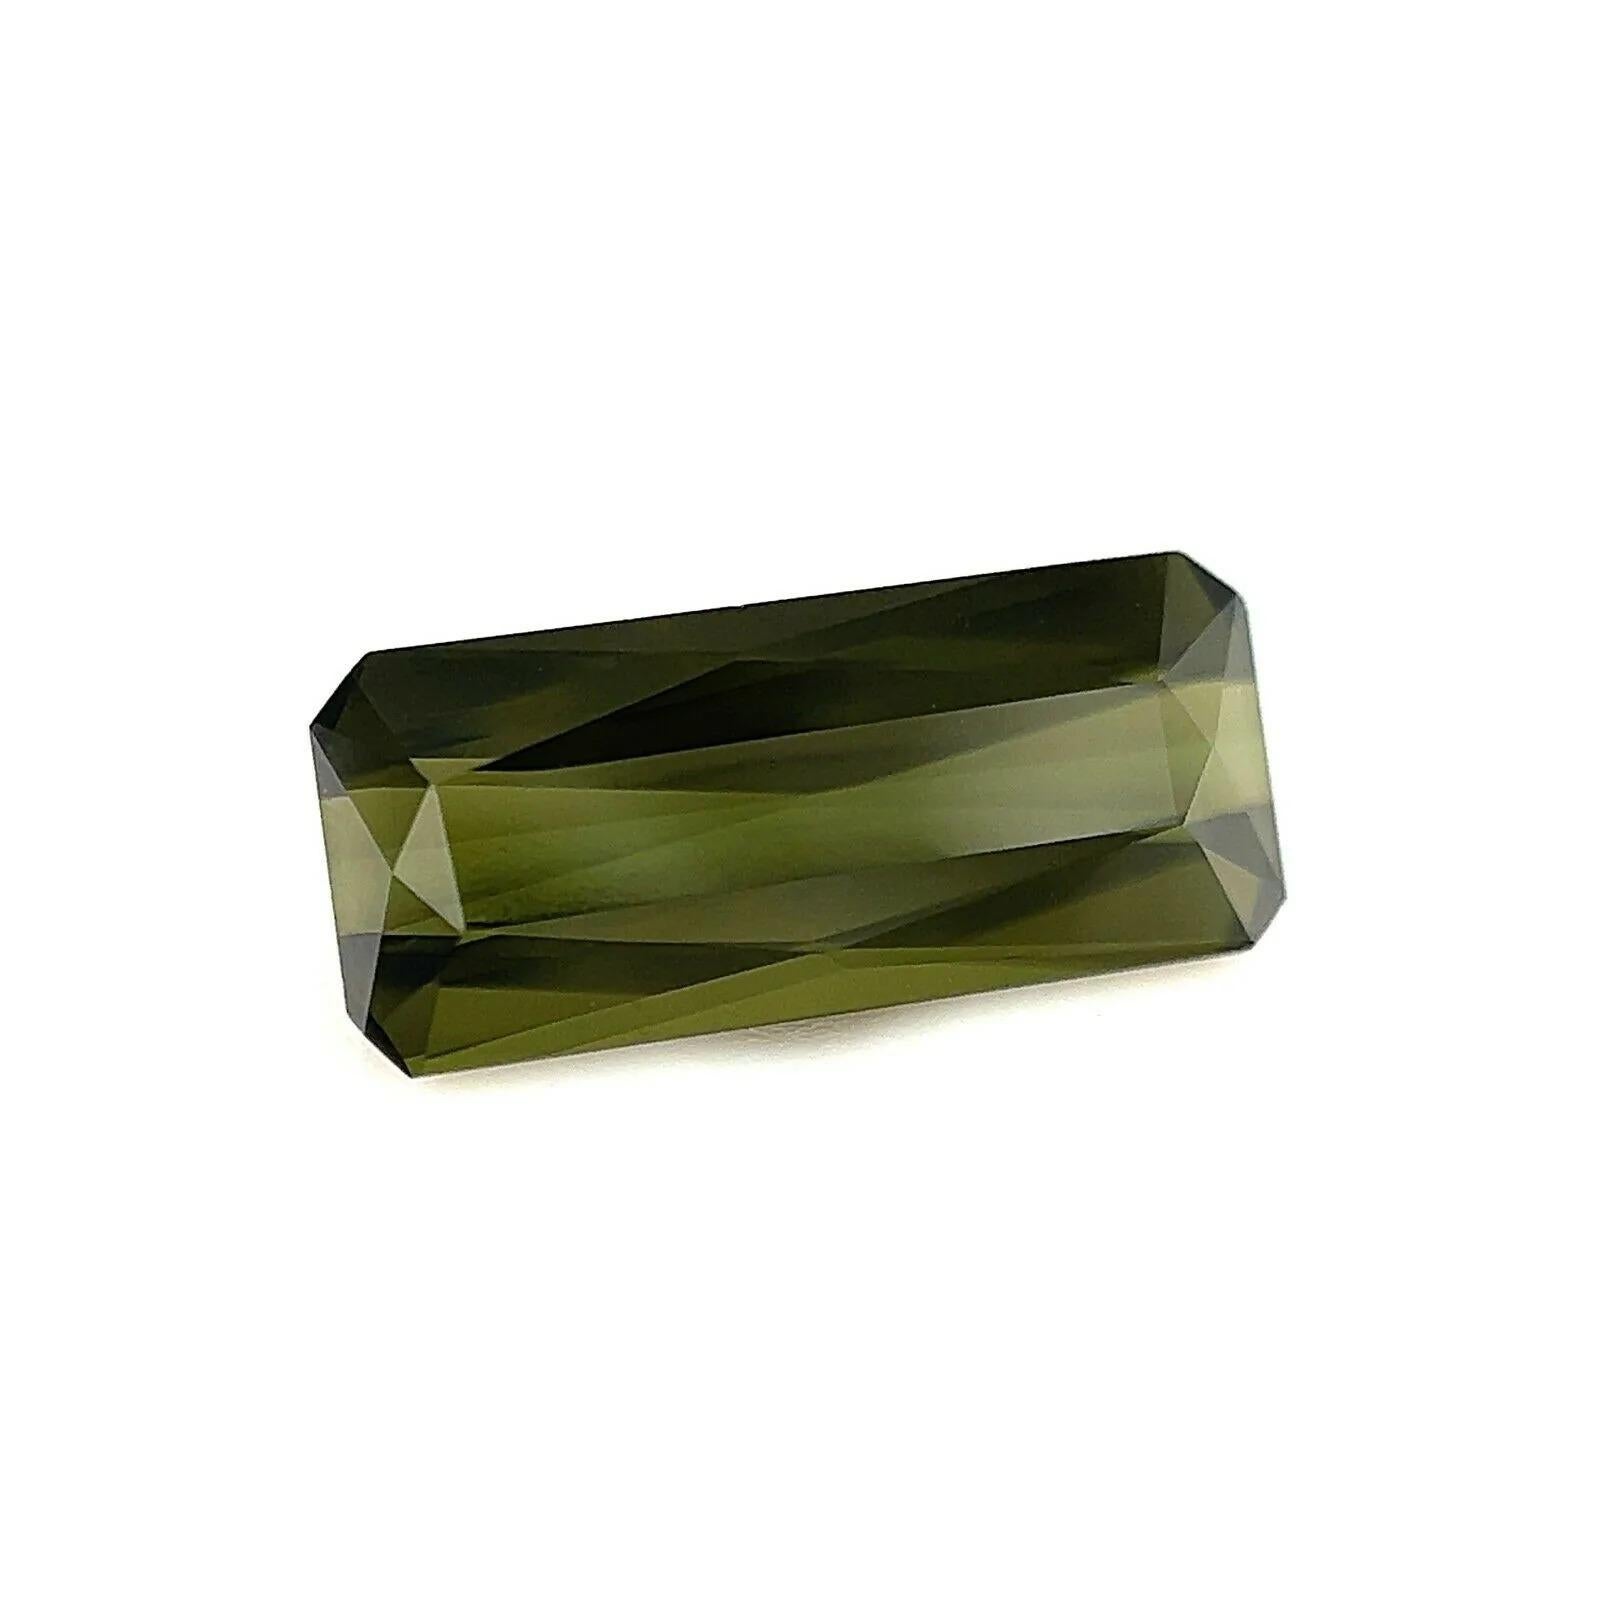 1.68ct Deep Green Tourmaline Fancy Octagon Scissor Emerald Cut 11.5x5mm

Natural Vivid Green Tourmaline Gemstone.
1.68 Carat with a beautiful vivid green colour and excellent clarity. Also has an excellent fancy emerald/octagon cut with good